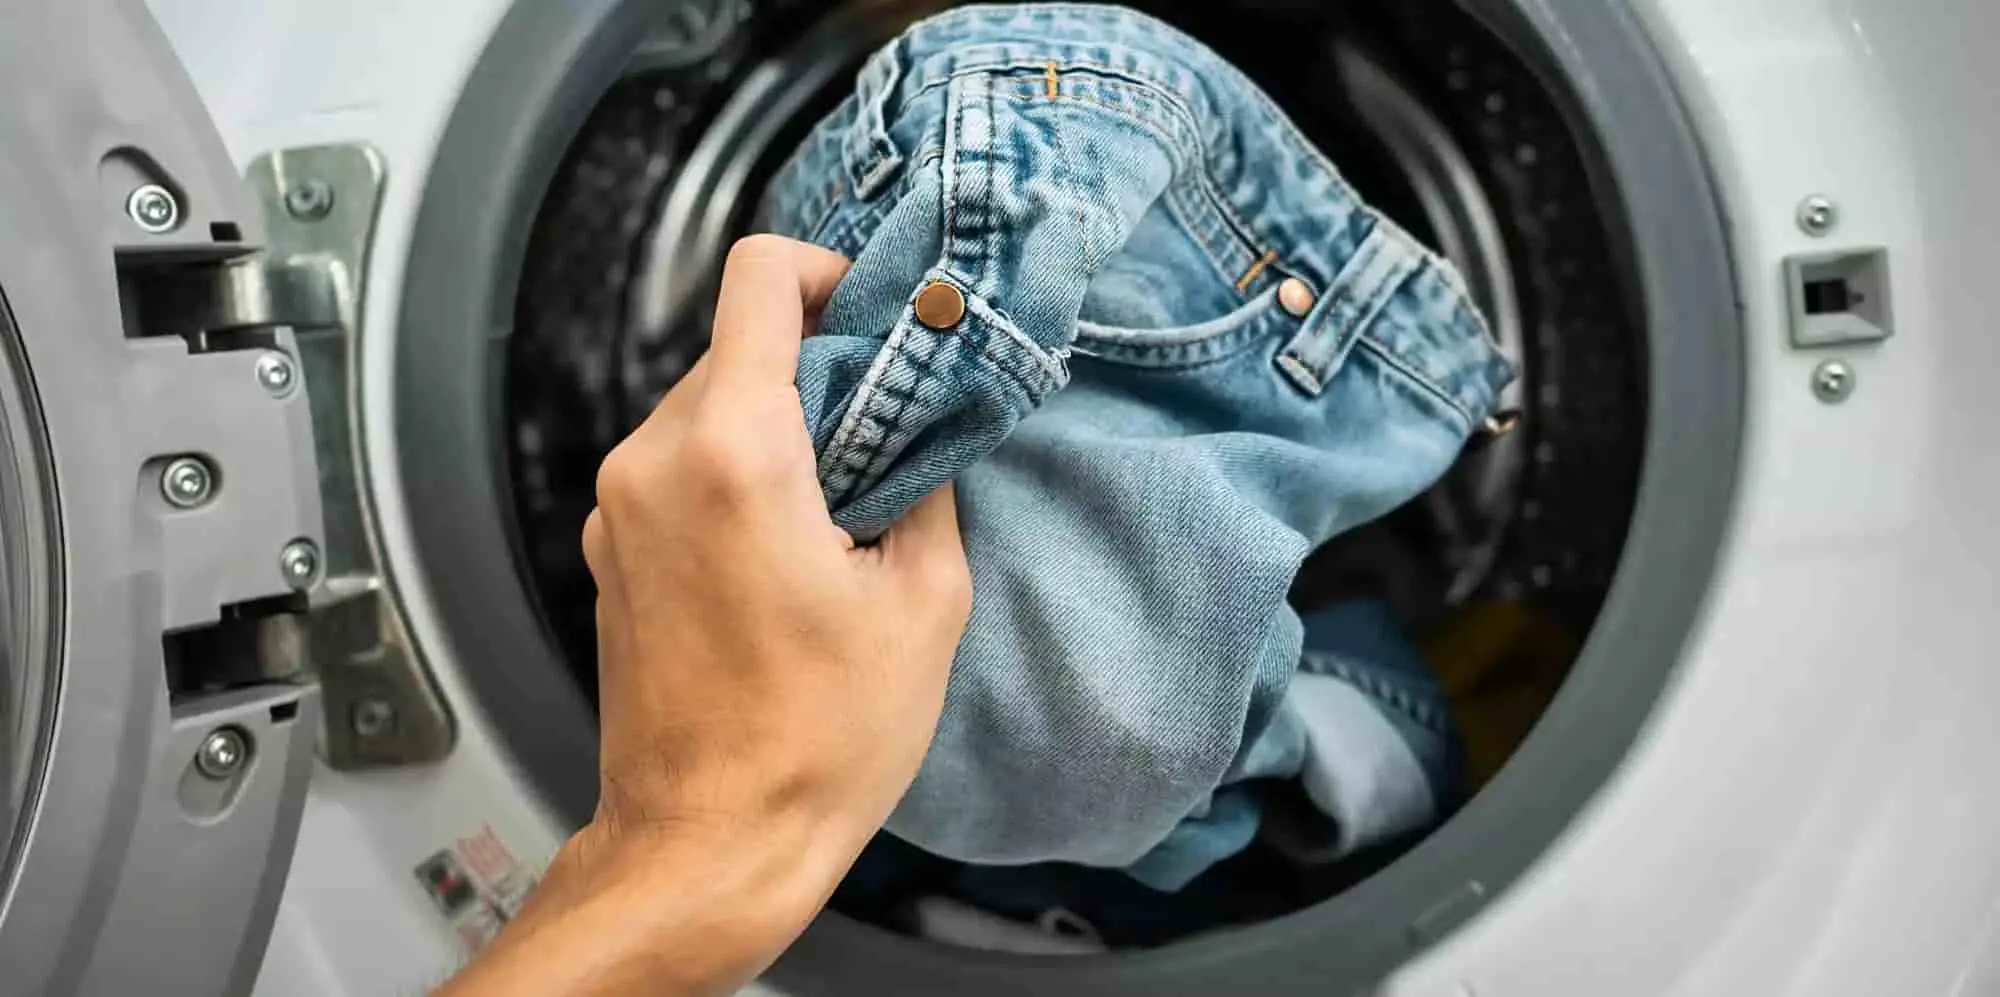 place the jeans in the washing machine for wash